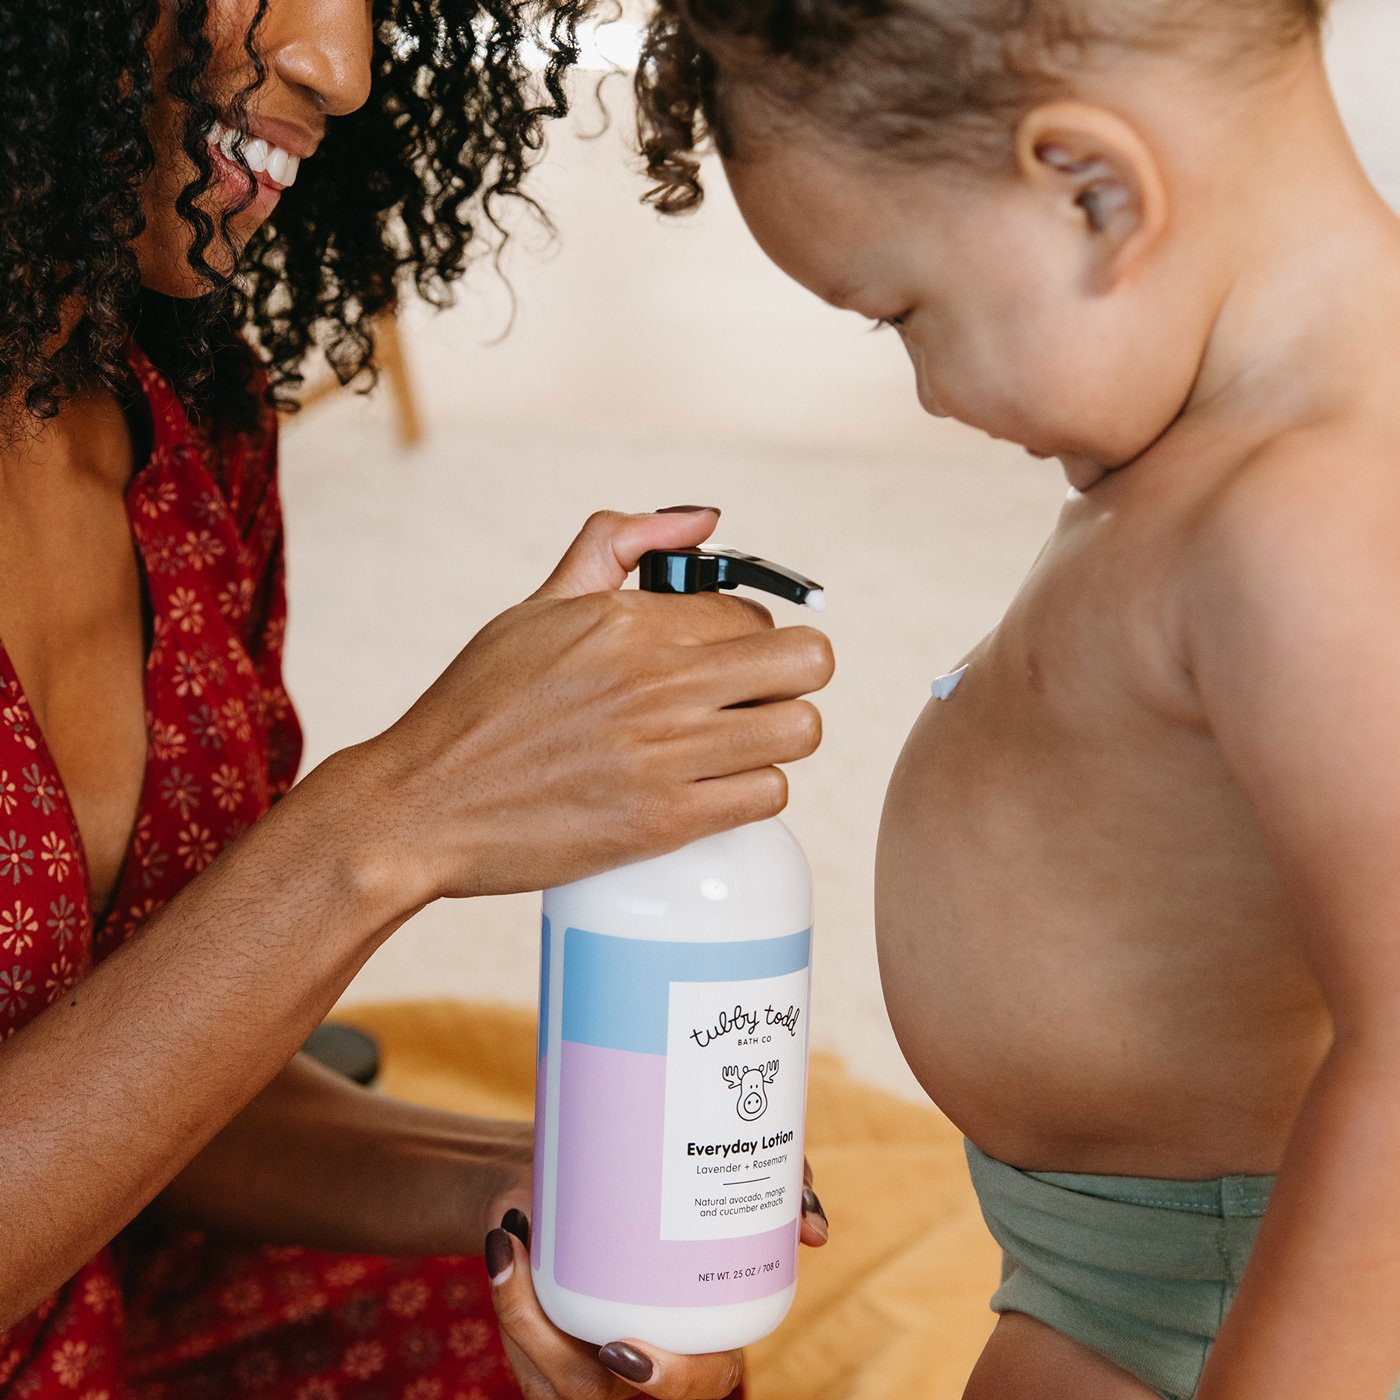 Mom is applying the Everyday Lotion to her baby's belly